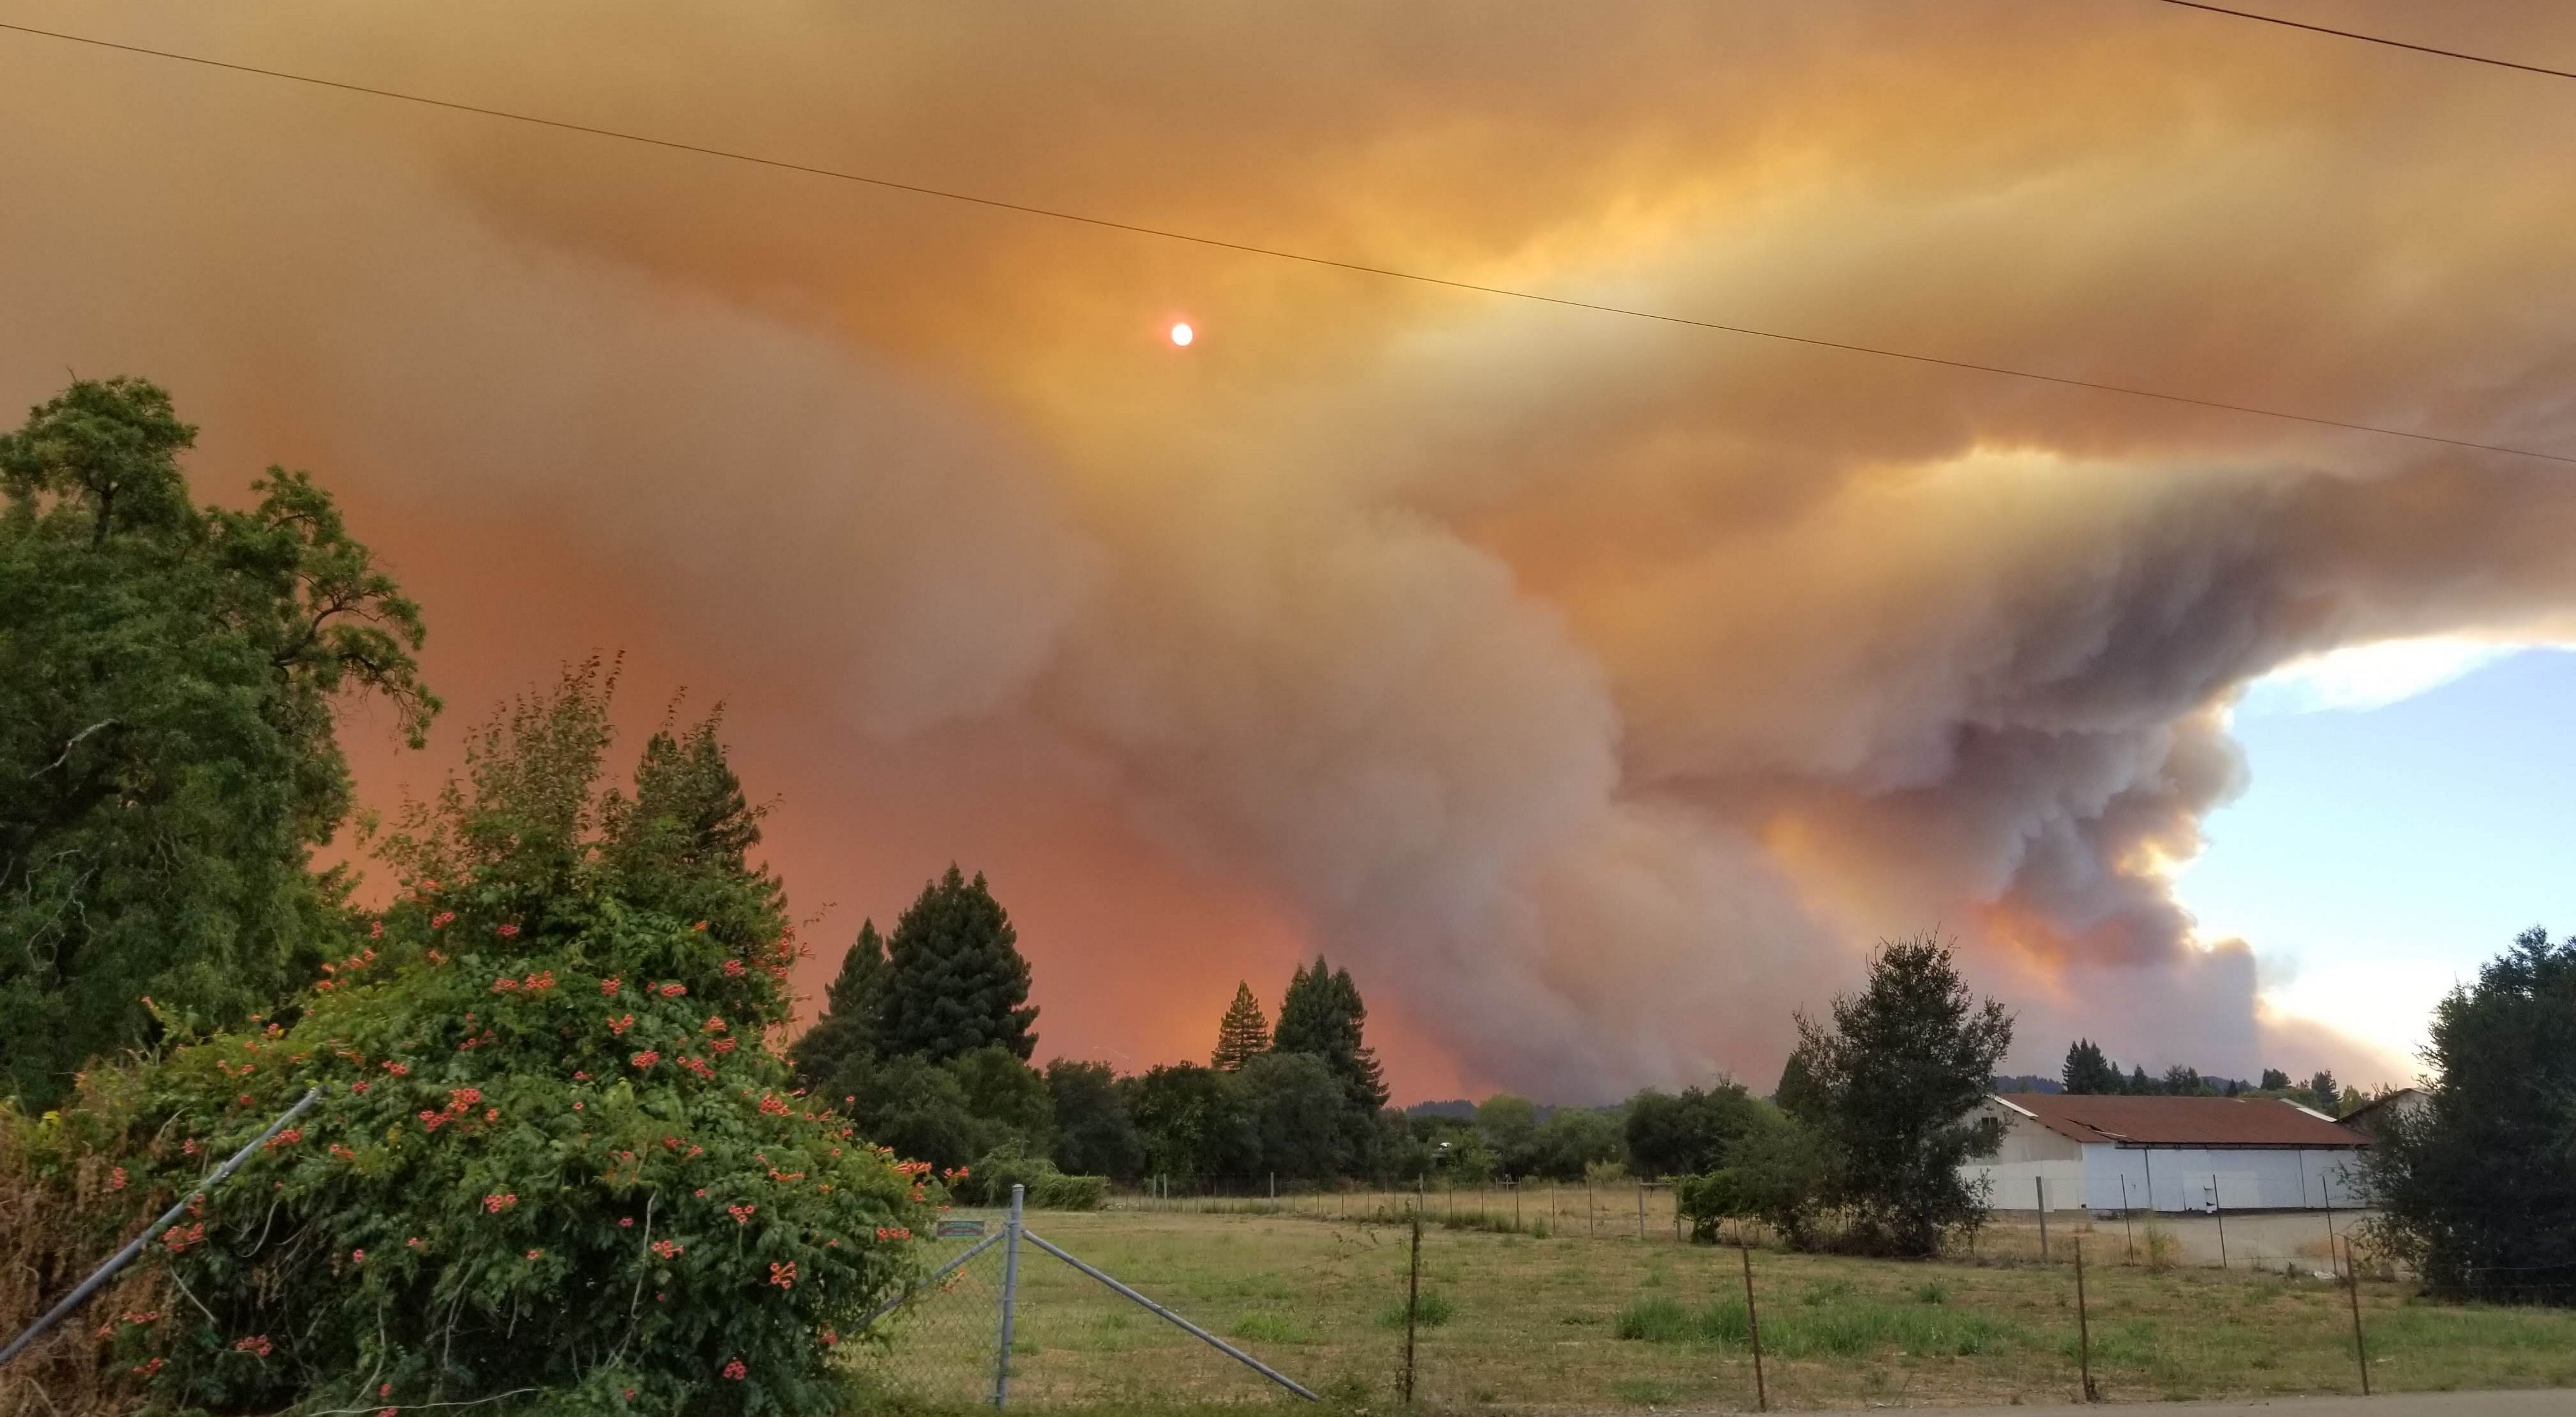 Large plumes of smoke sweeping through pine and oak forests in grassland meadows terrorizing the community in Healdsburg, California.